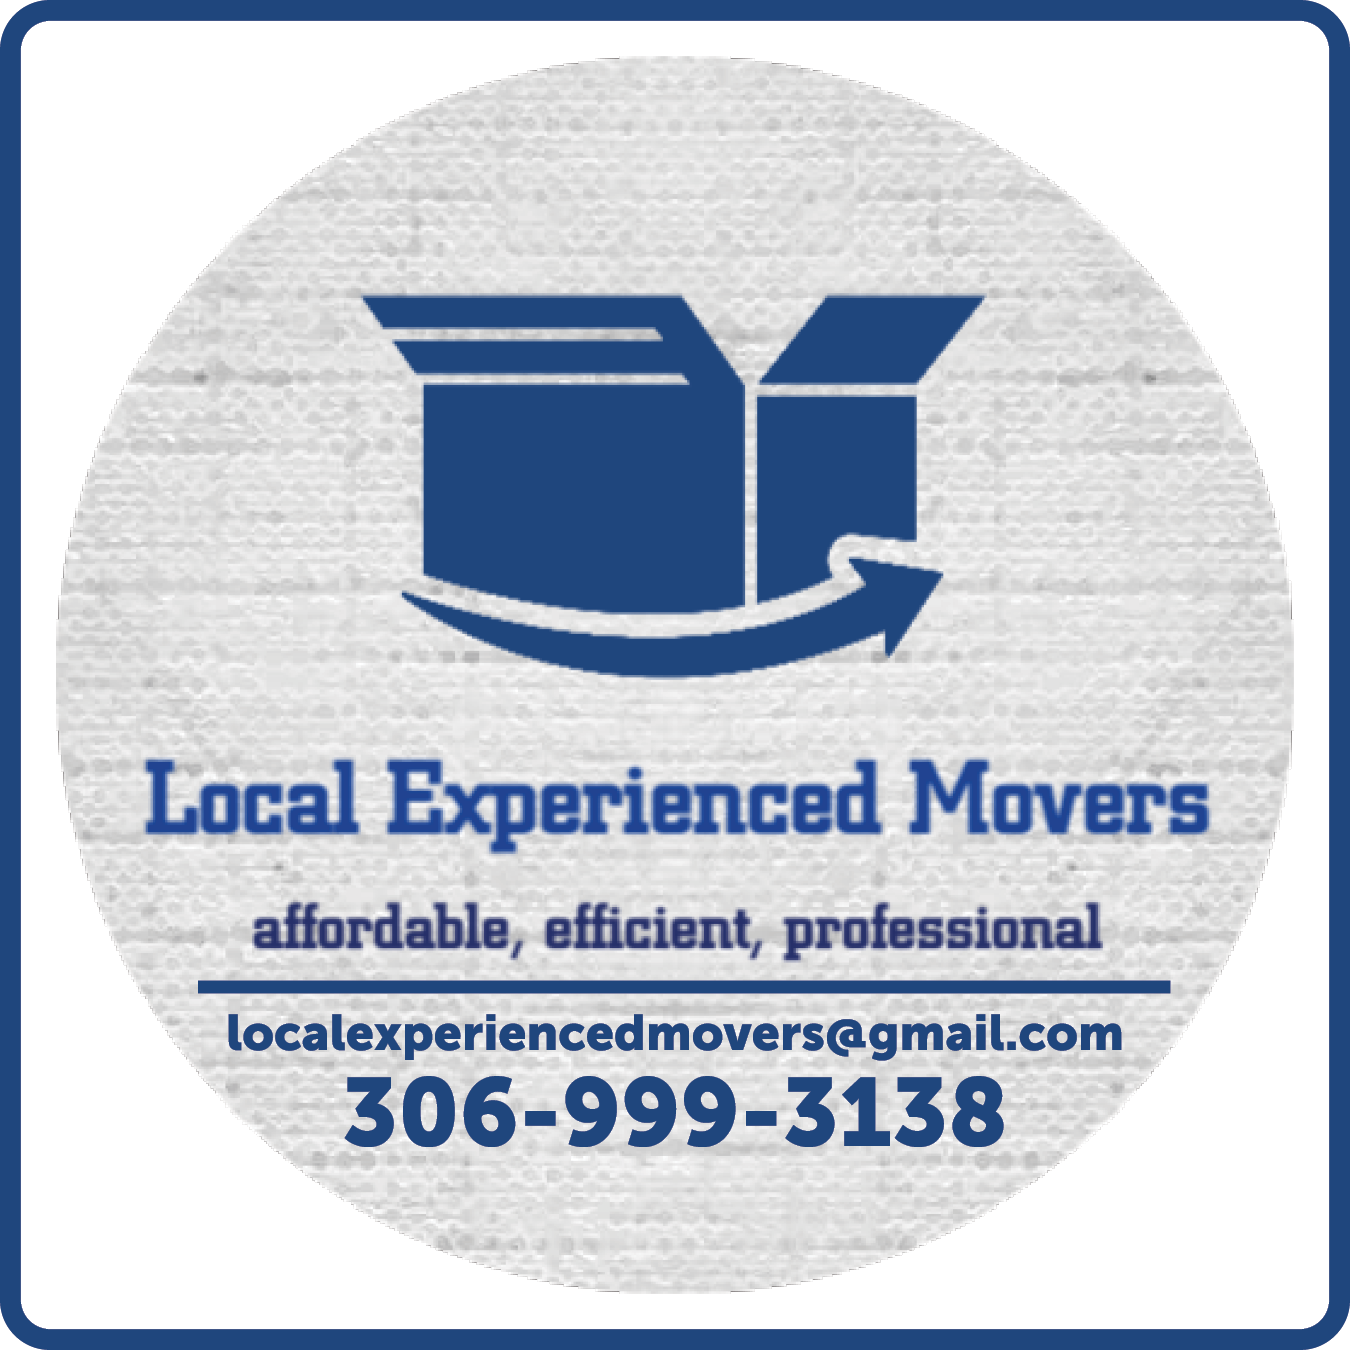 Local Experienced Movers